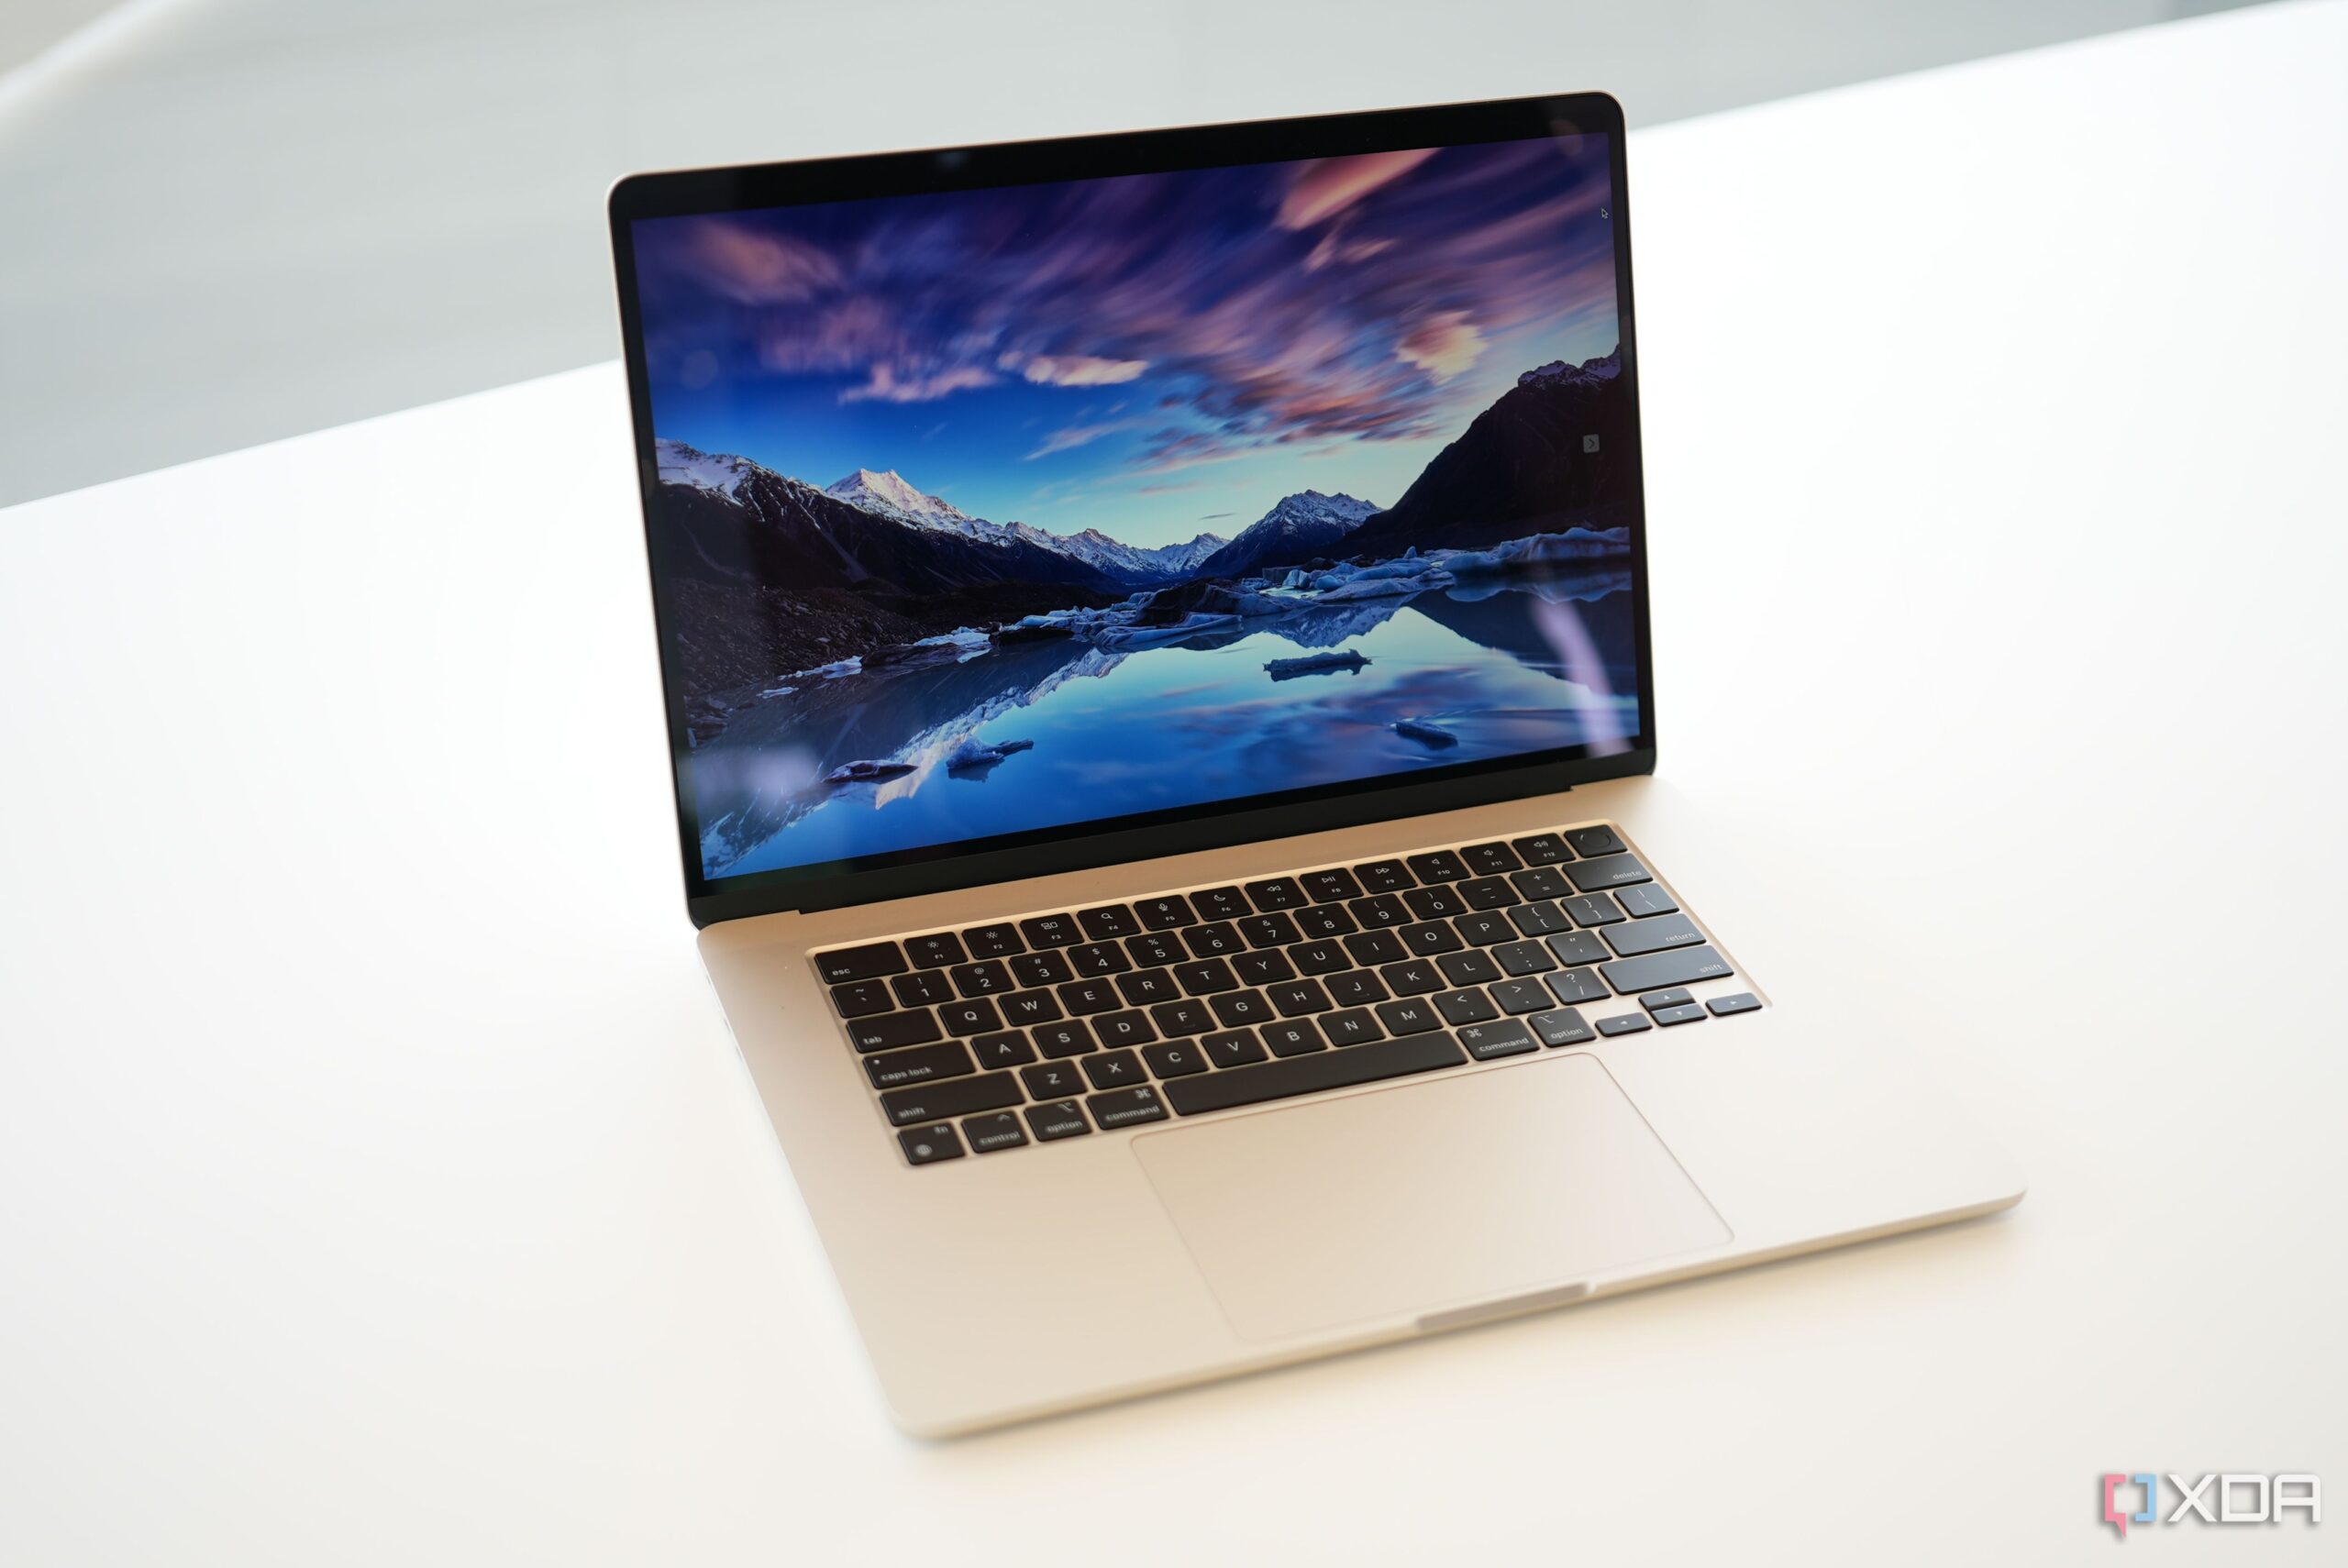 5 essential products for MacBook users working on the go